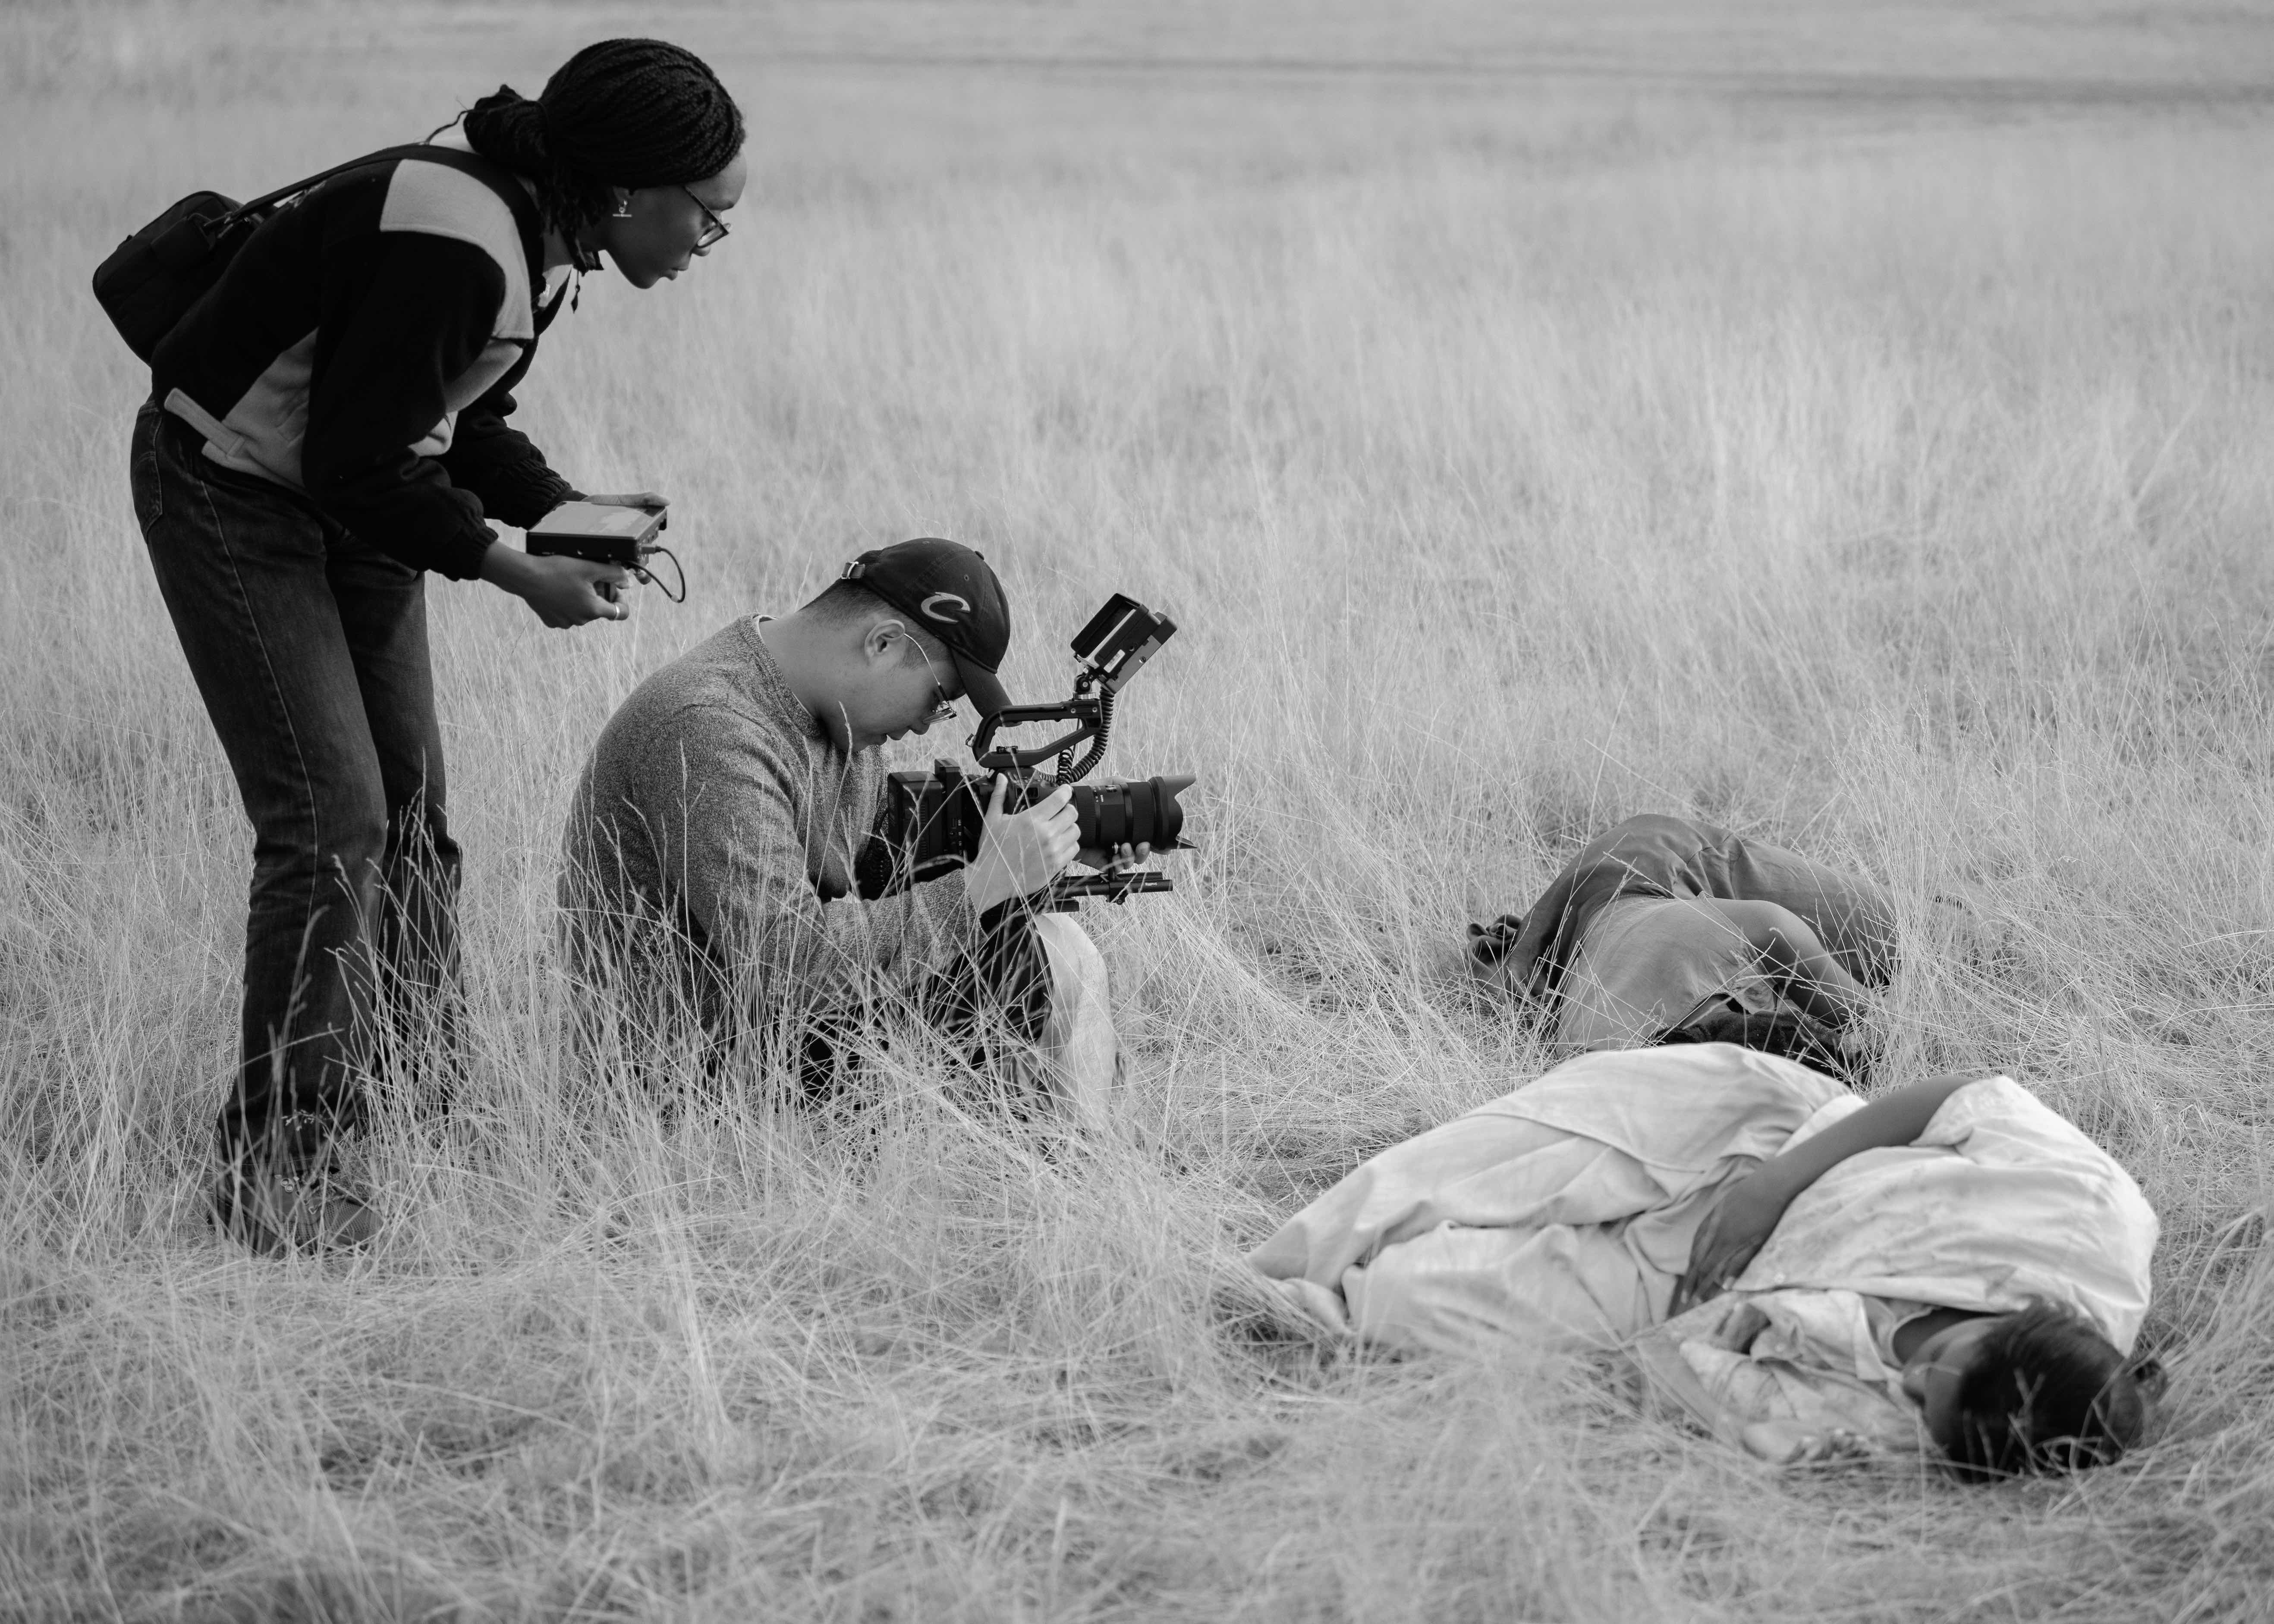 A photo in grayscale. There are two people lying amongst dry grass. There is another person sat on the ground filming these two people. A fourth person crouches over the person filming, watching through the lens of the camera.
